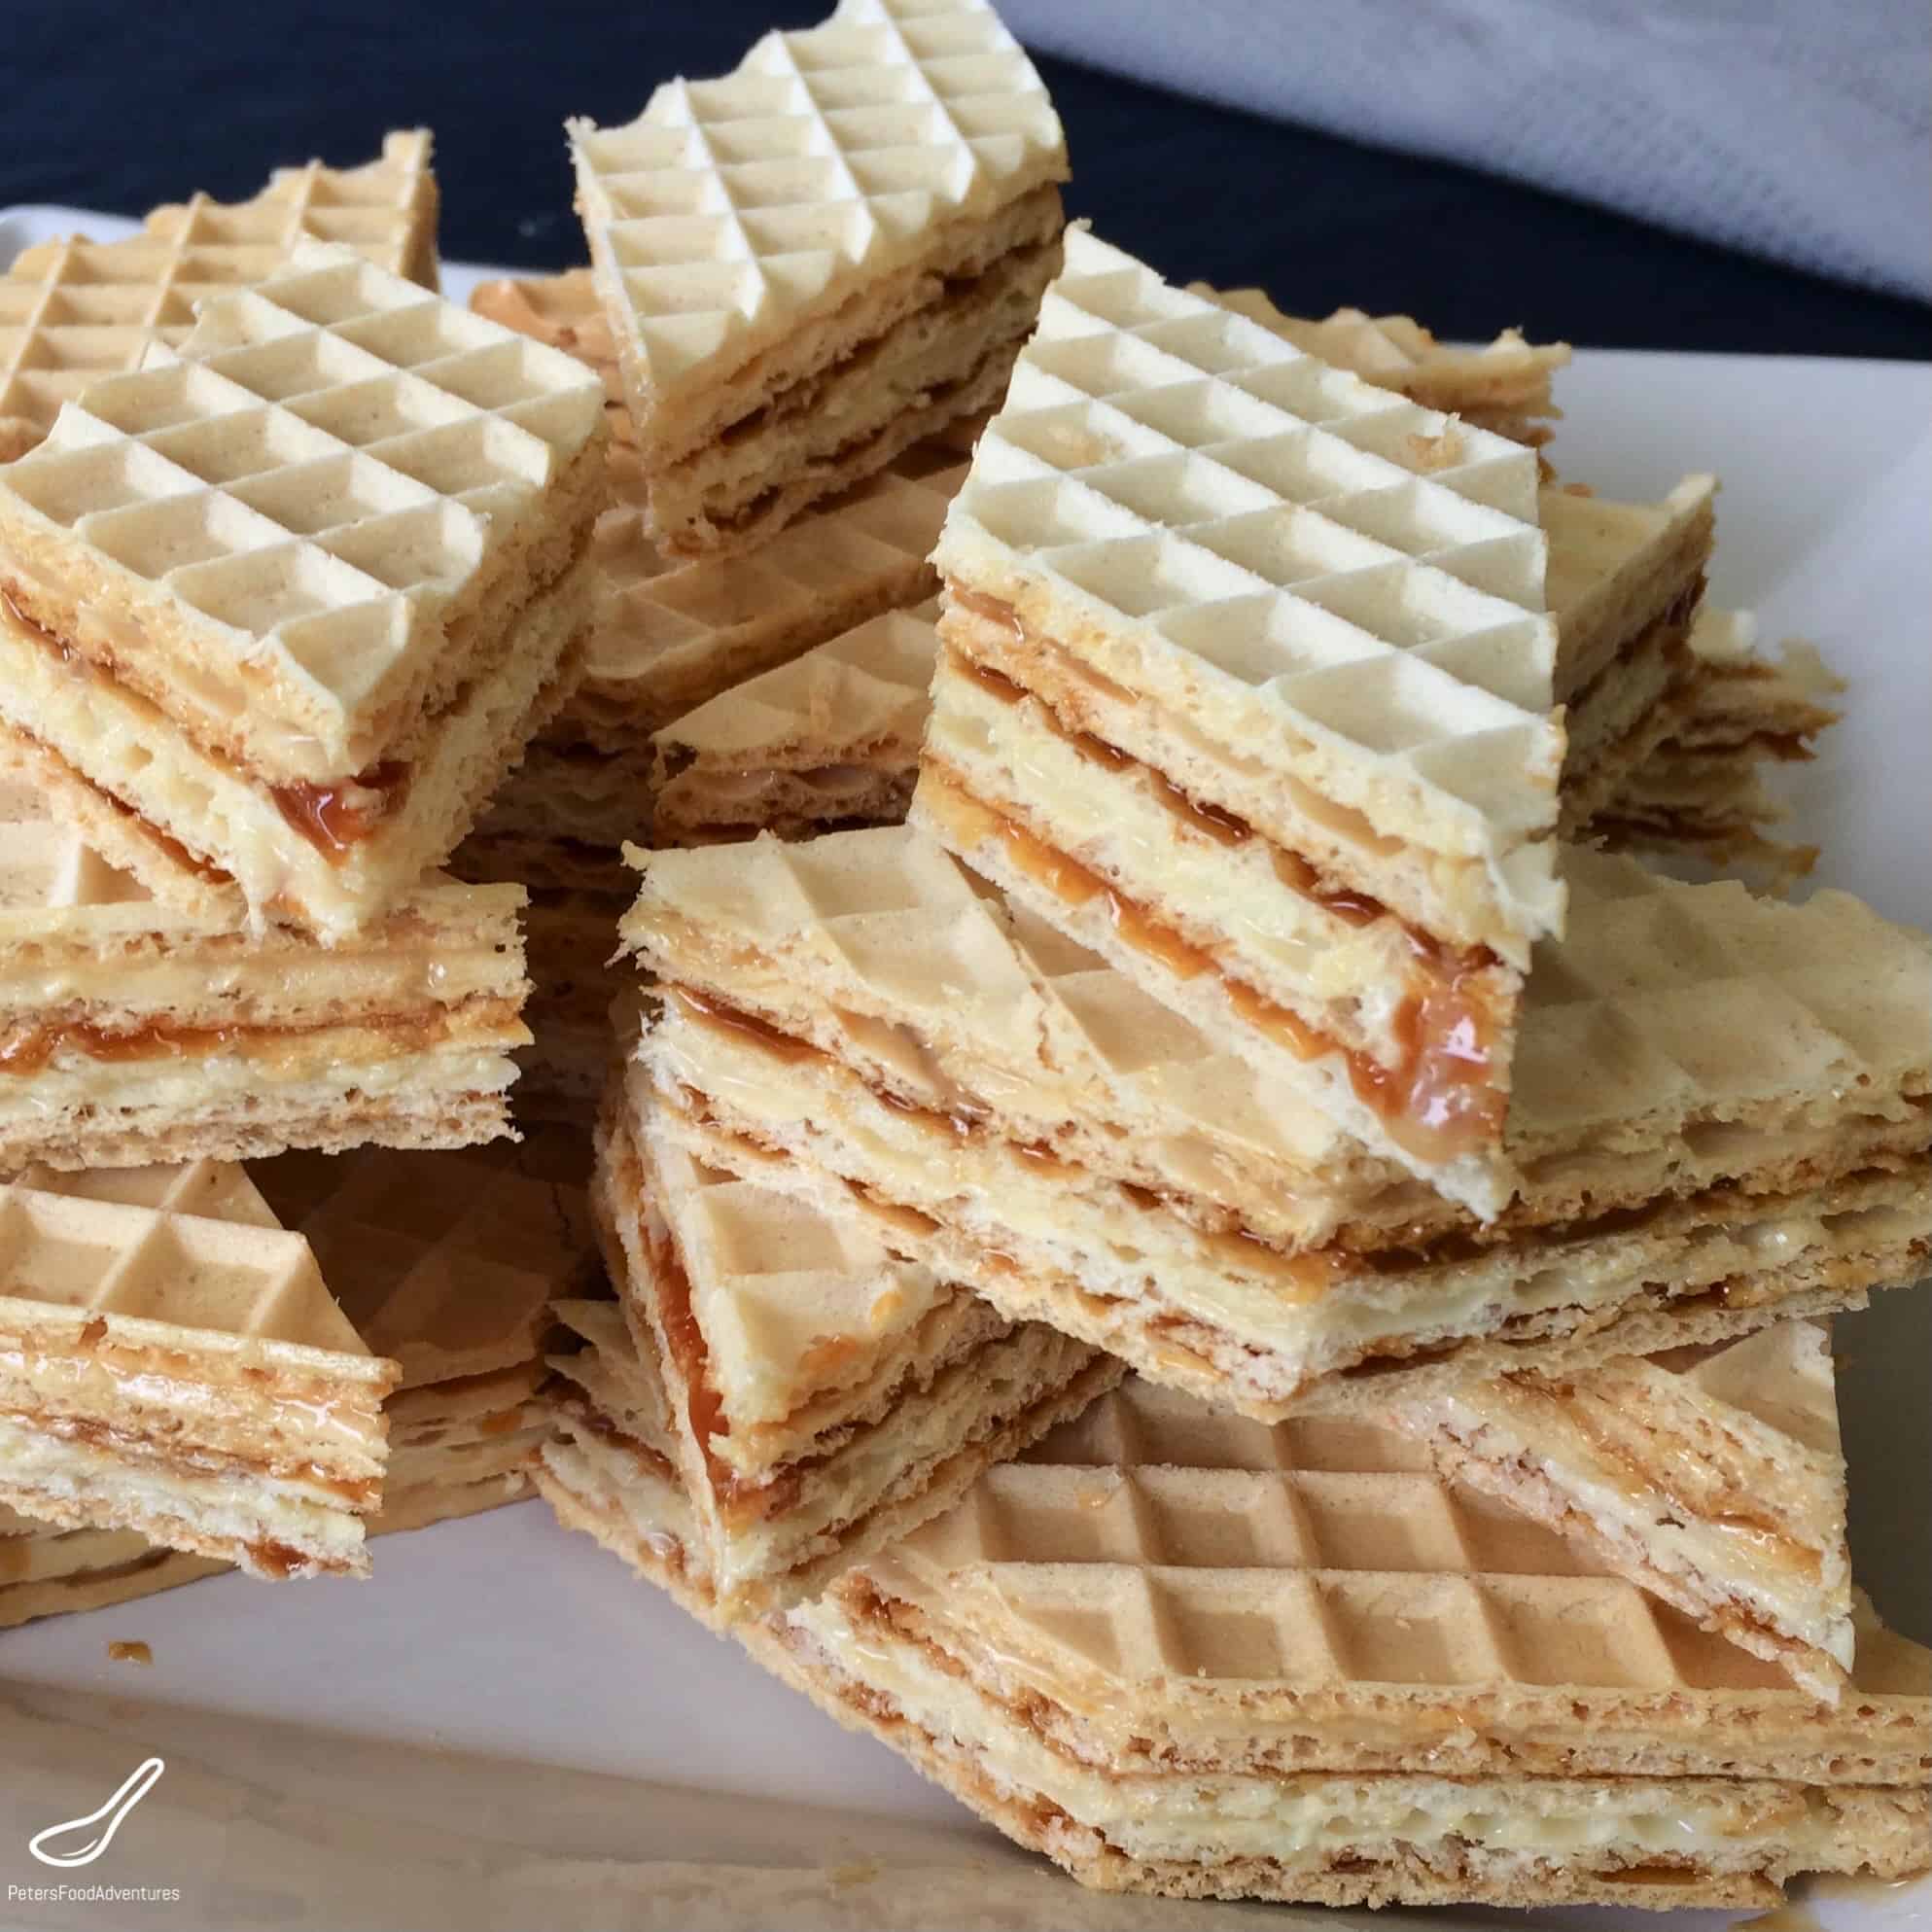 Super easy to make, and so caramel-y and sticky. It's known by several different names in Eastern Europe, Вафли, Oblandi, or Oblate - Vafli Wafer Cake with Caramel (Вафли)